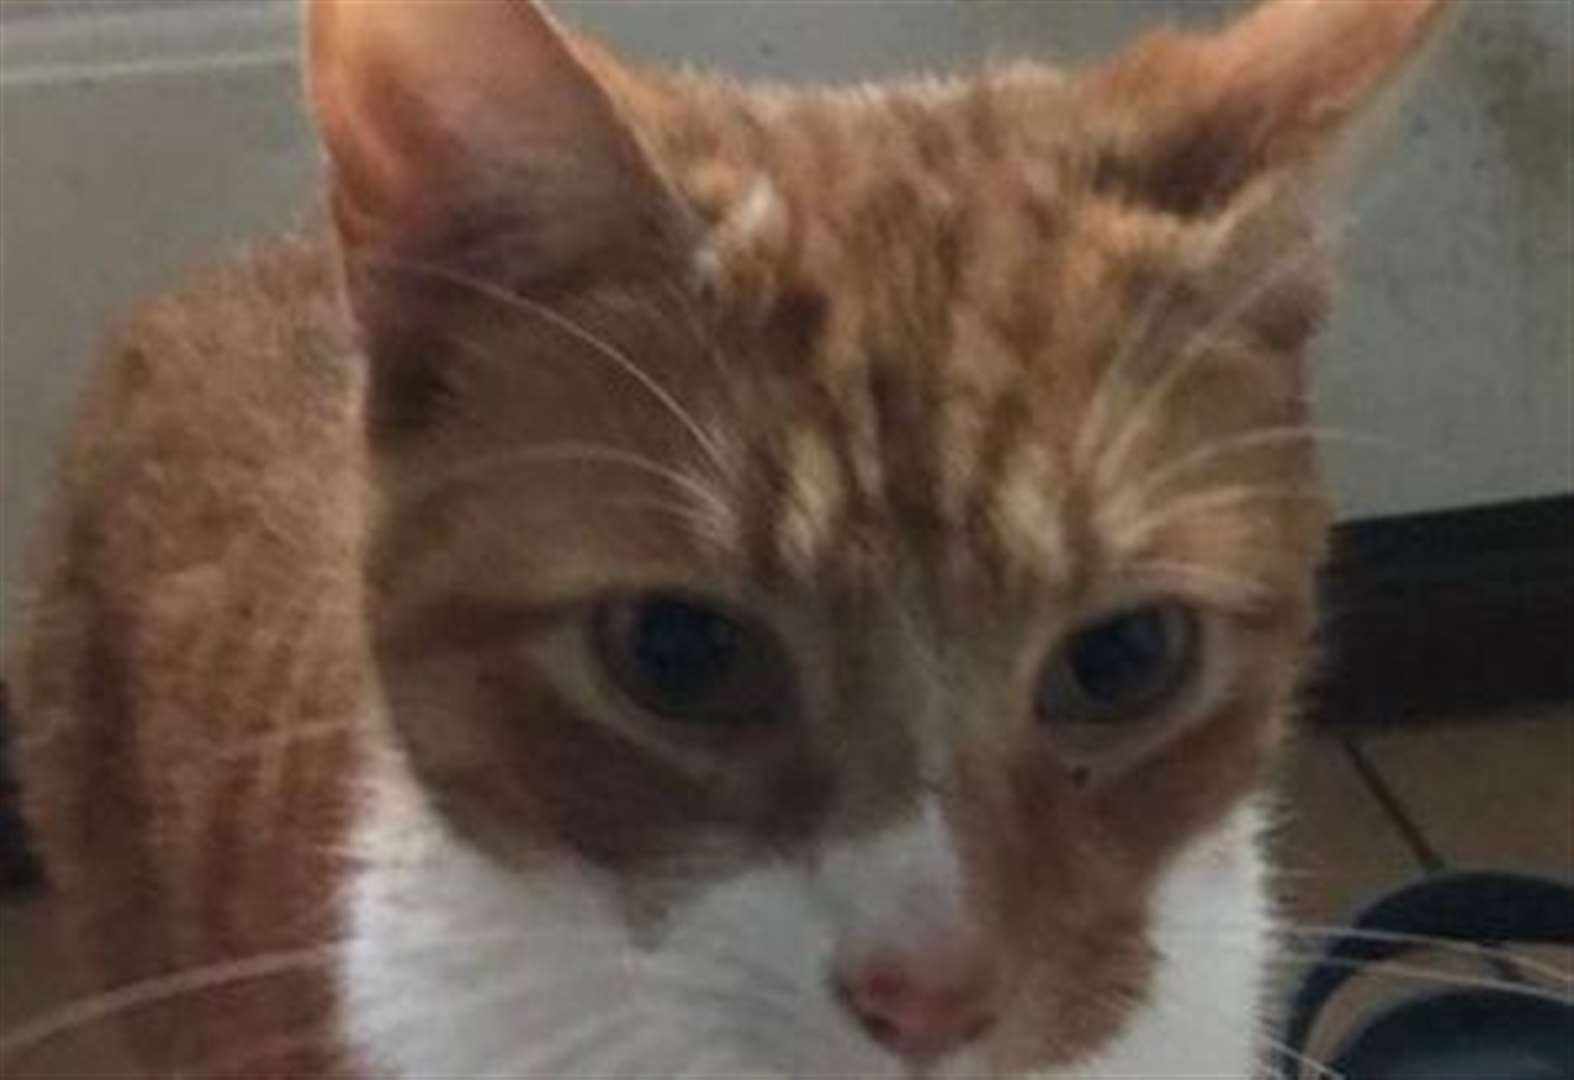 Dad set up petition after son's cat dies